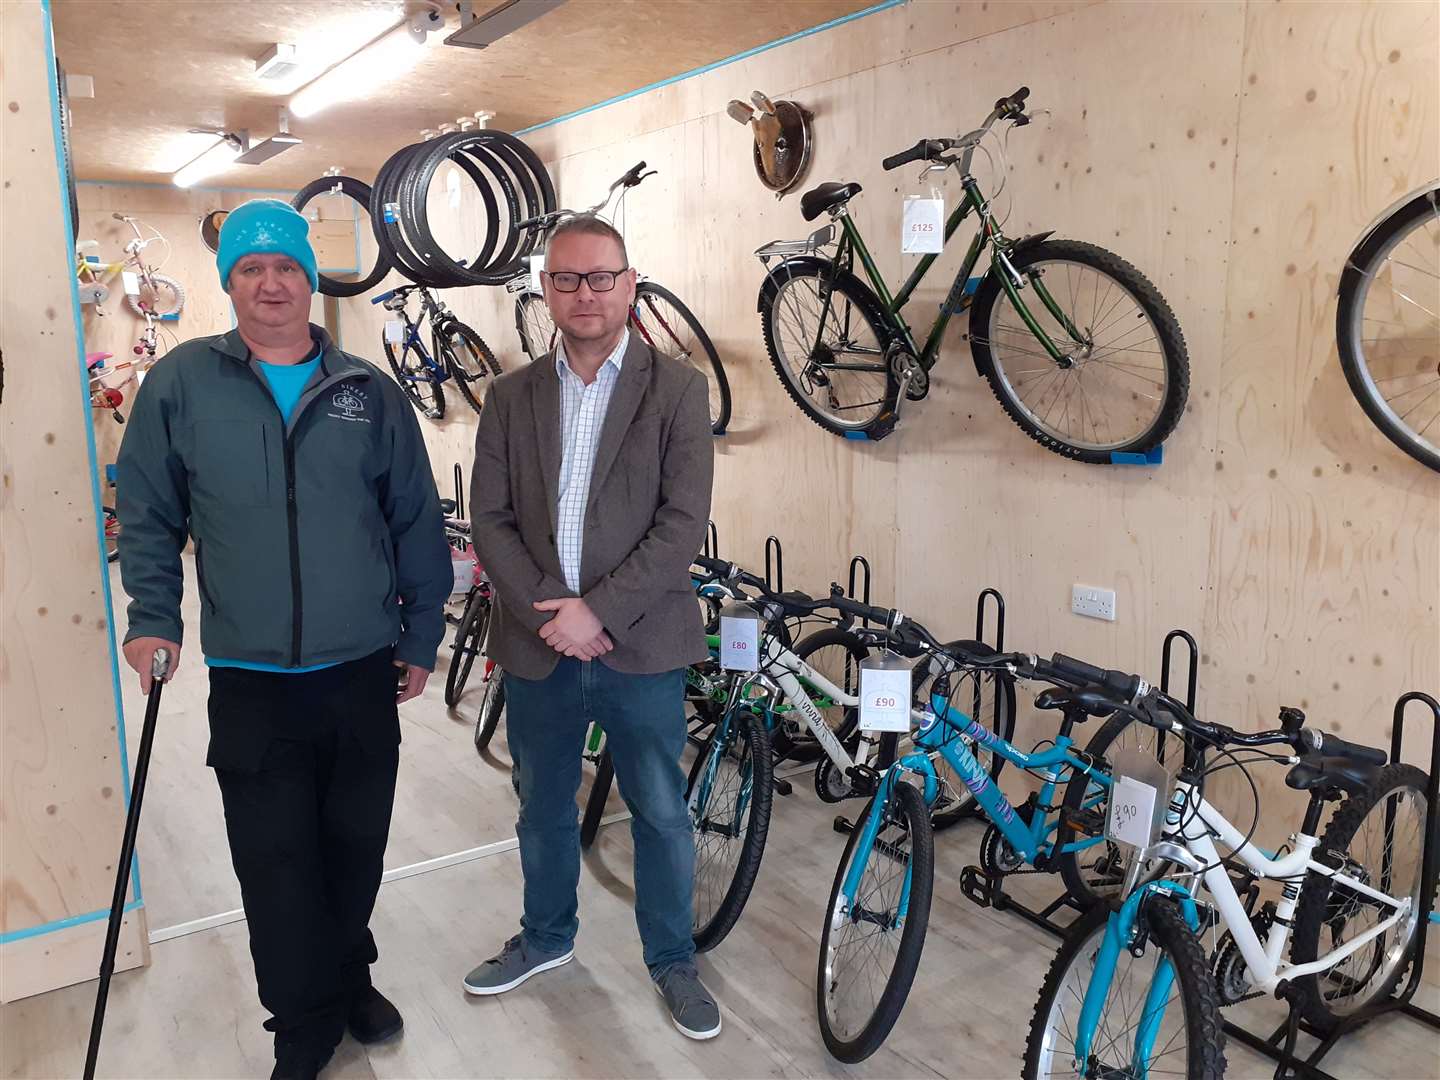 Stuart Pow, Volunteer Mechanic, and Richard Thomson MP with some of the bikes on offer at The Bikery, Gordon Street, Huntly.